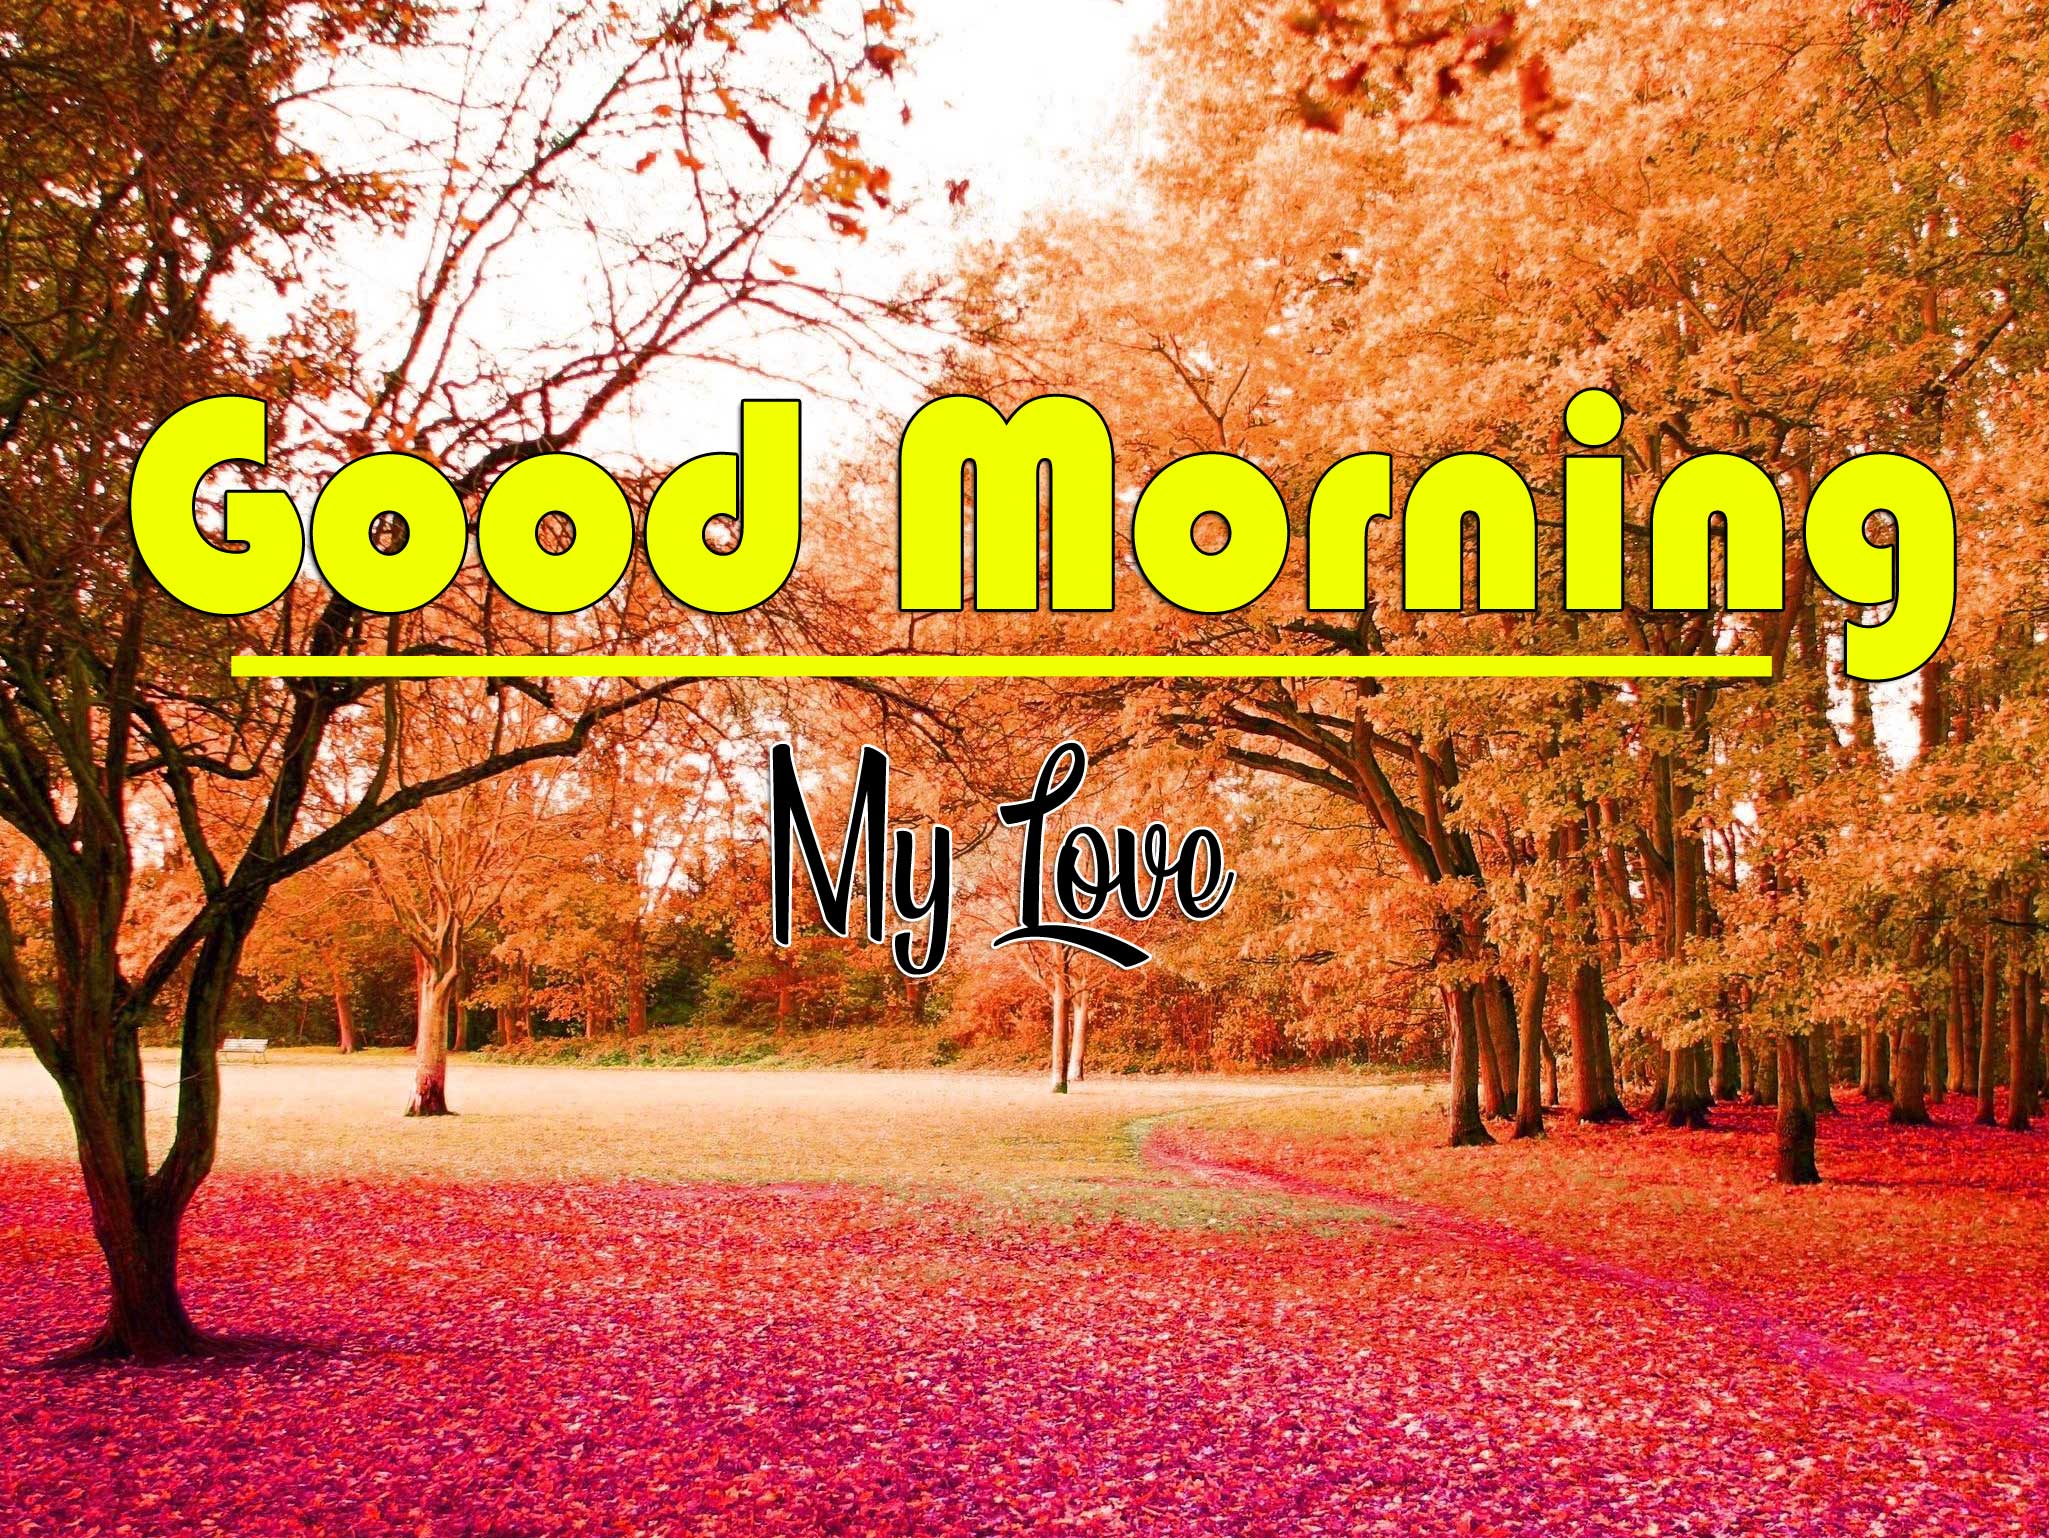 Good Morning Wishes pics Pictures Download 